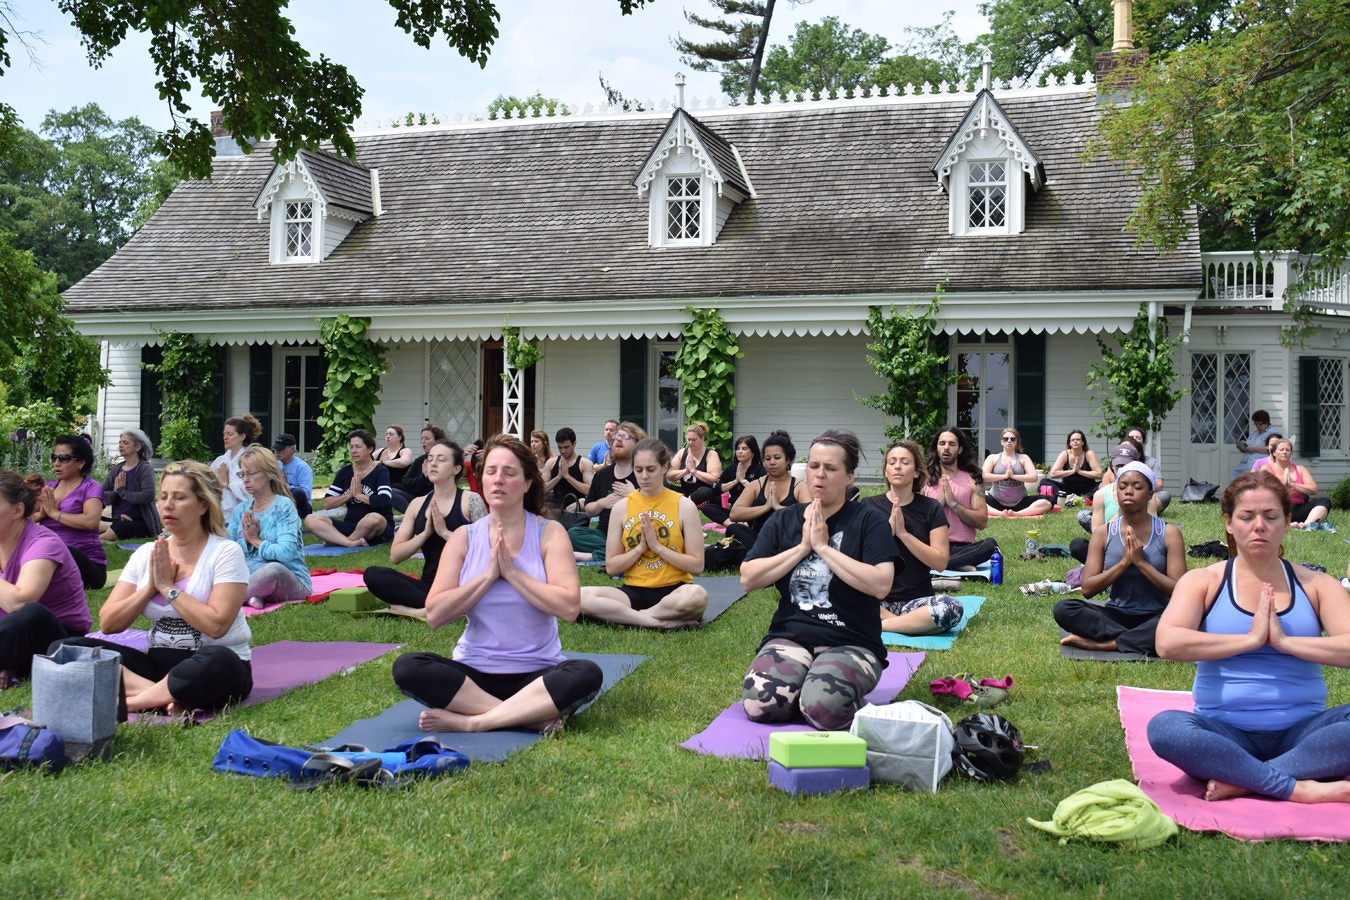 On a grassy lawn in front of the attractive, ivy-wreathed Alice Austen House on Staten Island in New York, yoga practitioners are cross-legged with their hands pressed together